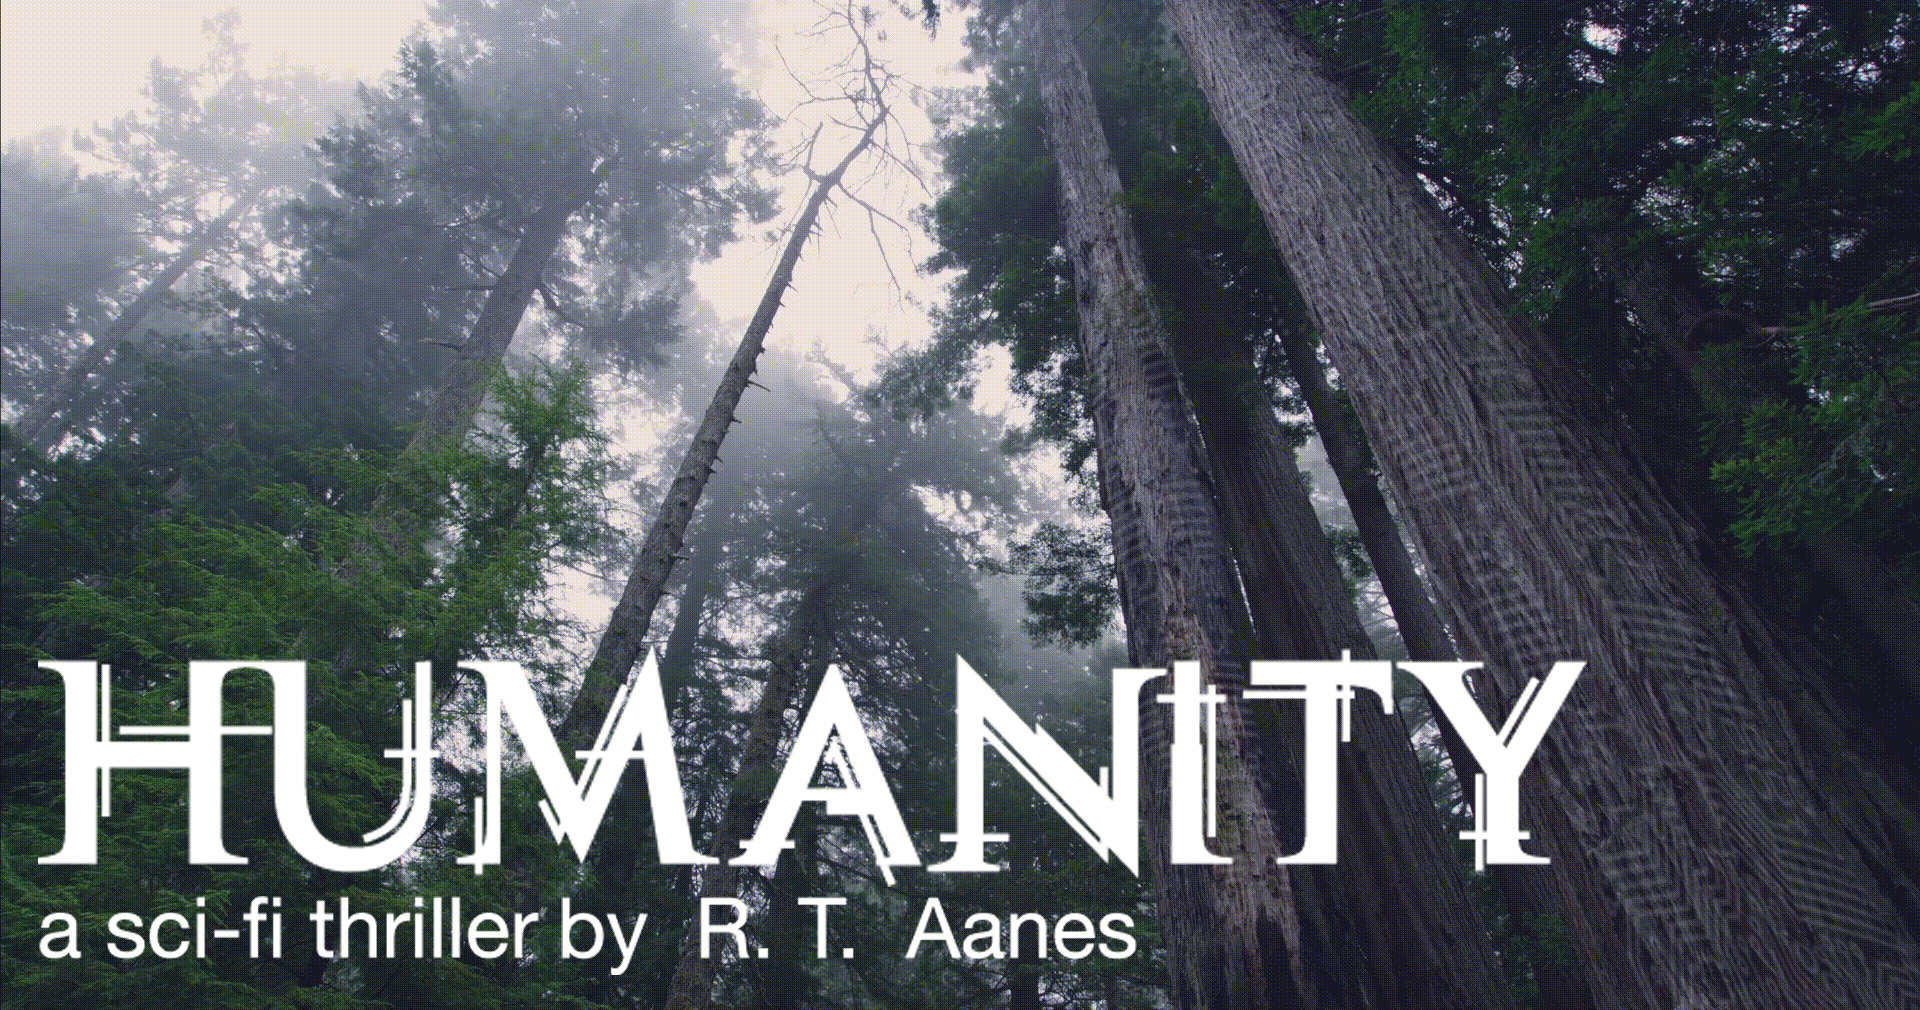 Science Fiction Writer R. T. Aanes Launches First Book in Epic ‘Humanity’ Series